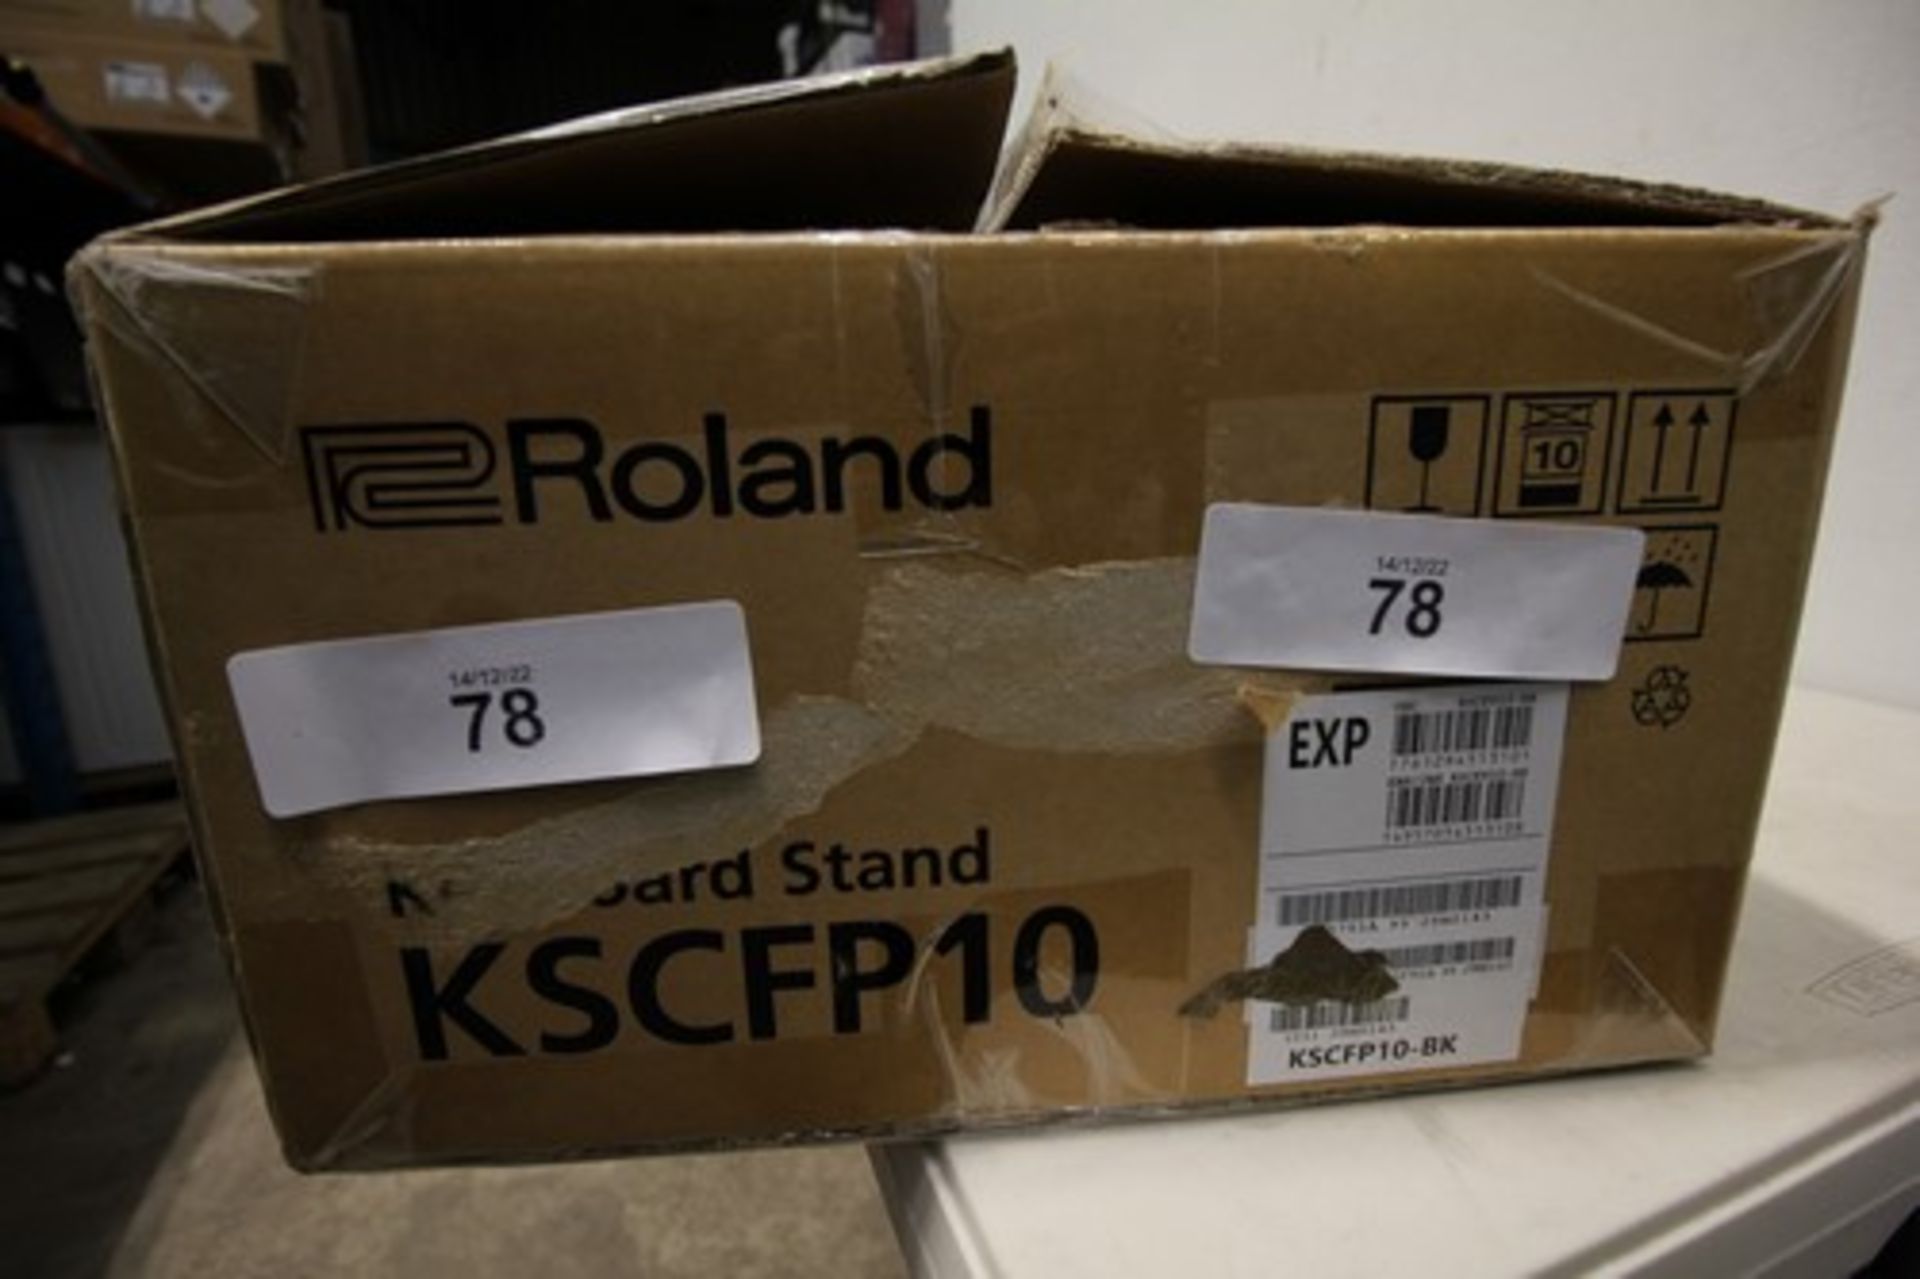 1 x Roland keyboard stand, model KSCFP10 - new in box (ES7)